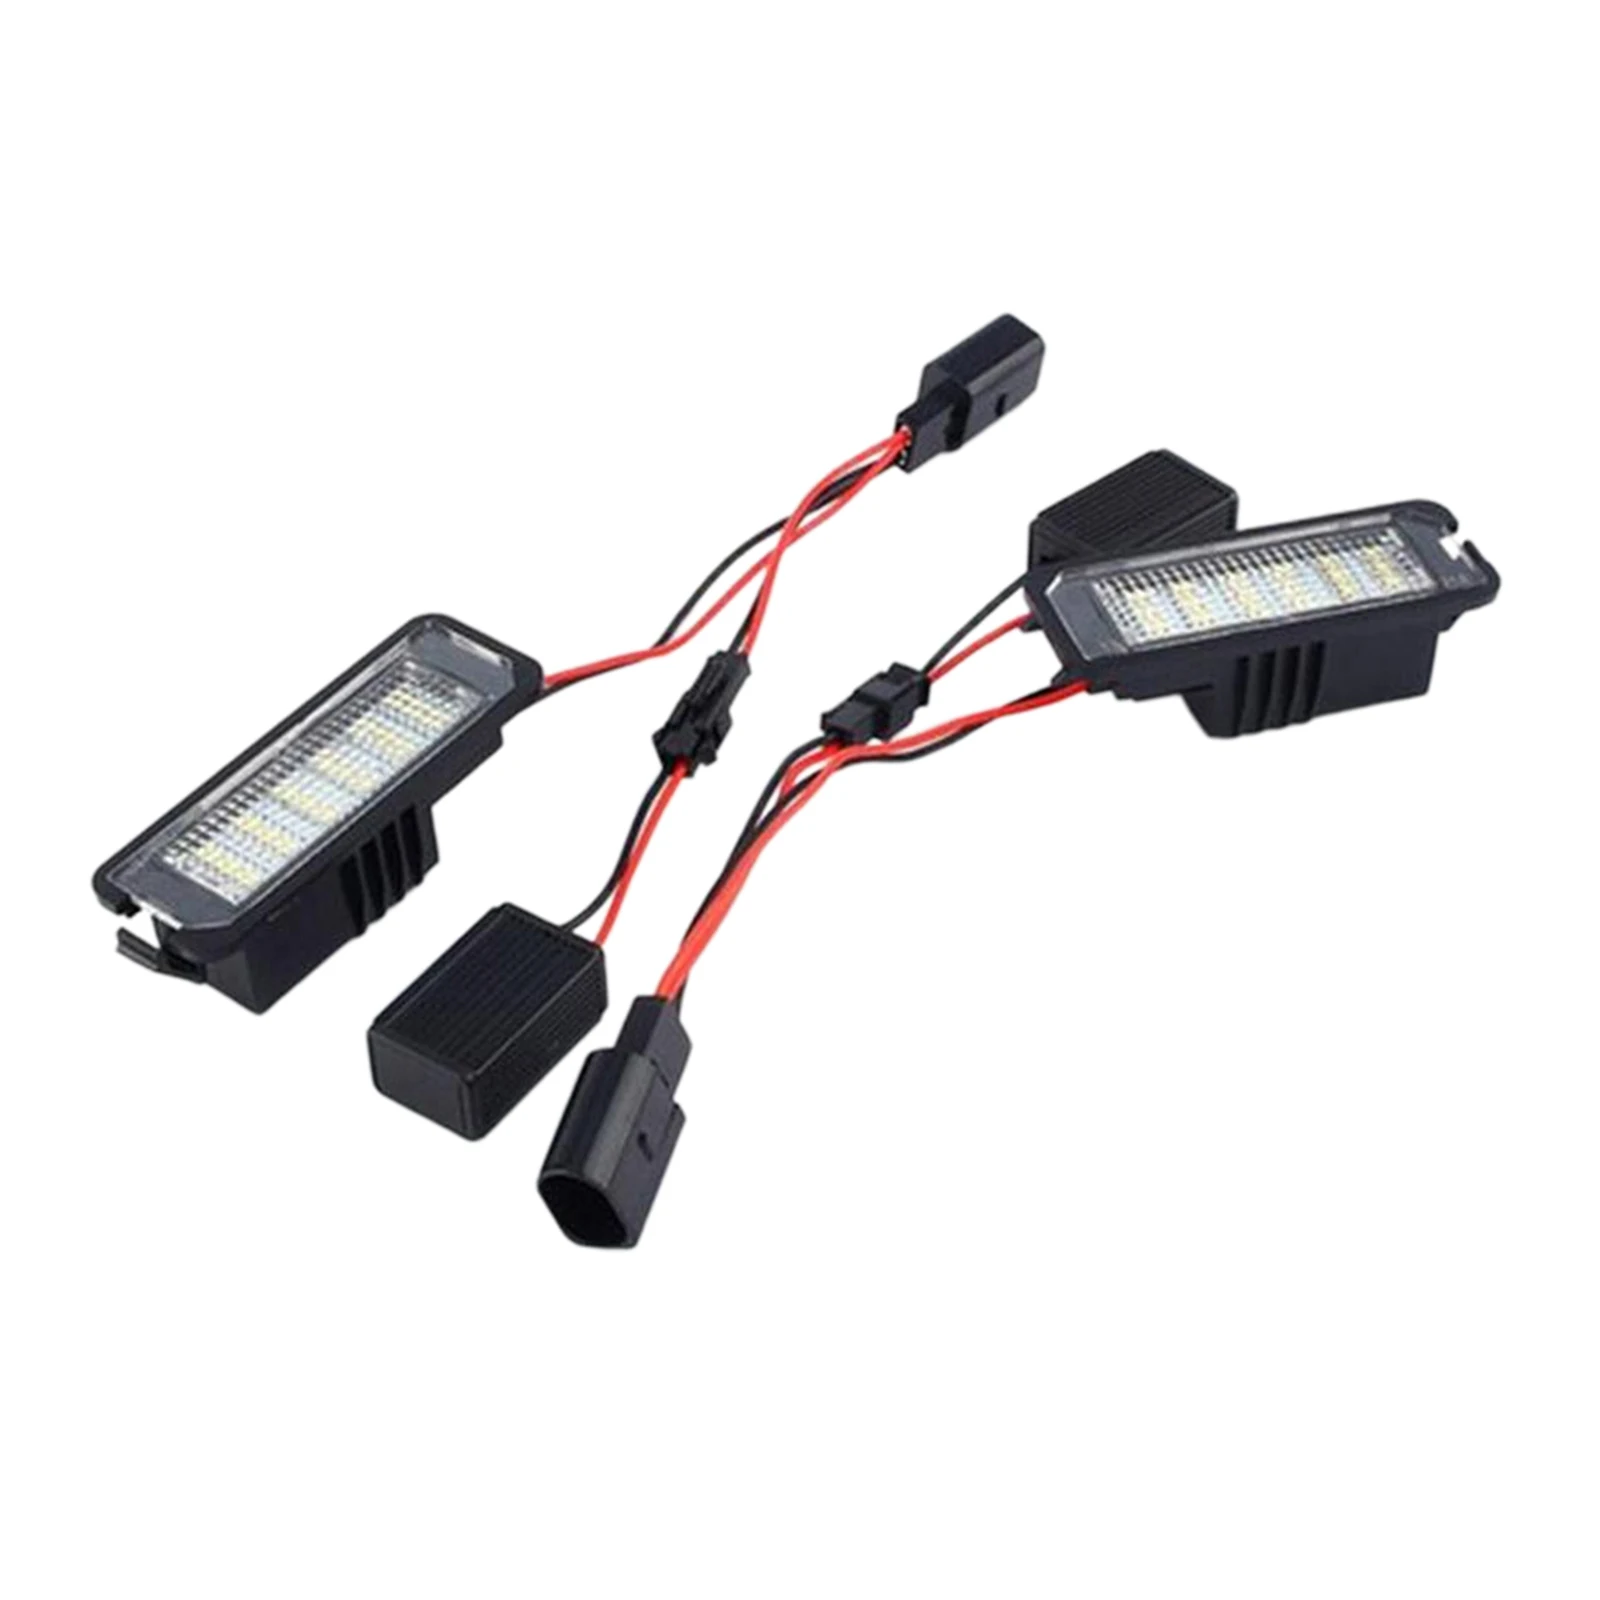 2x Car LED Number License Number Plate Light Lamp Bulb Assembly Fits for VW Golf Passat CC Eos